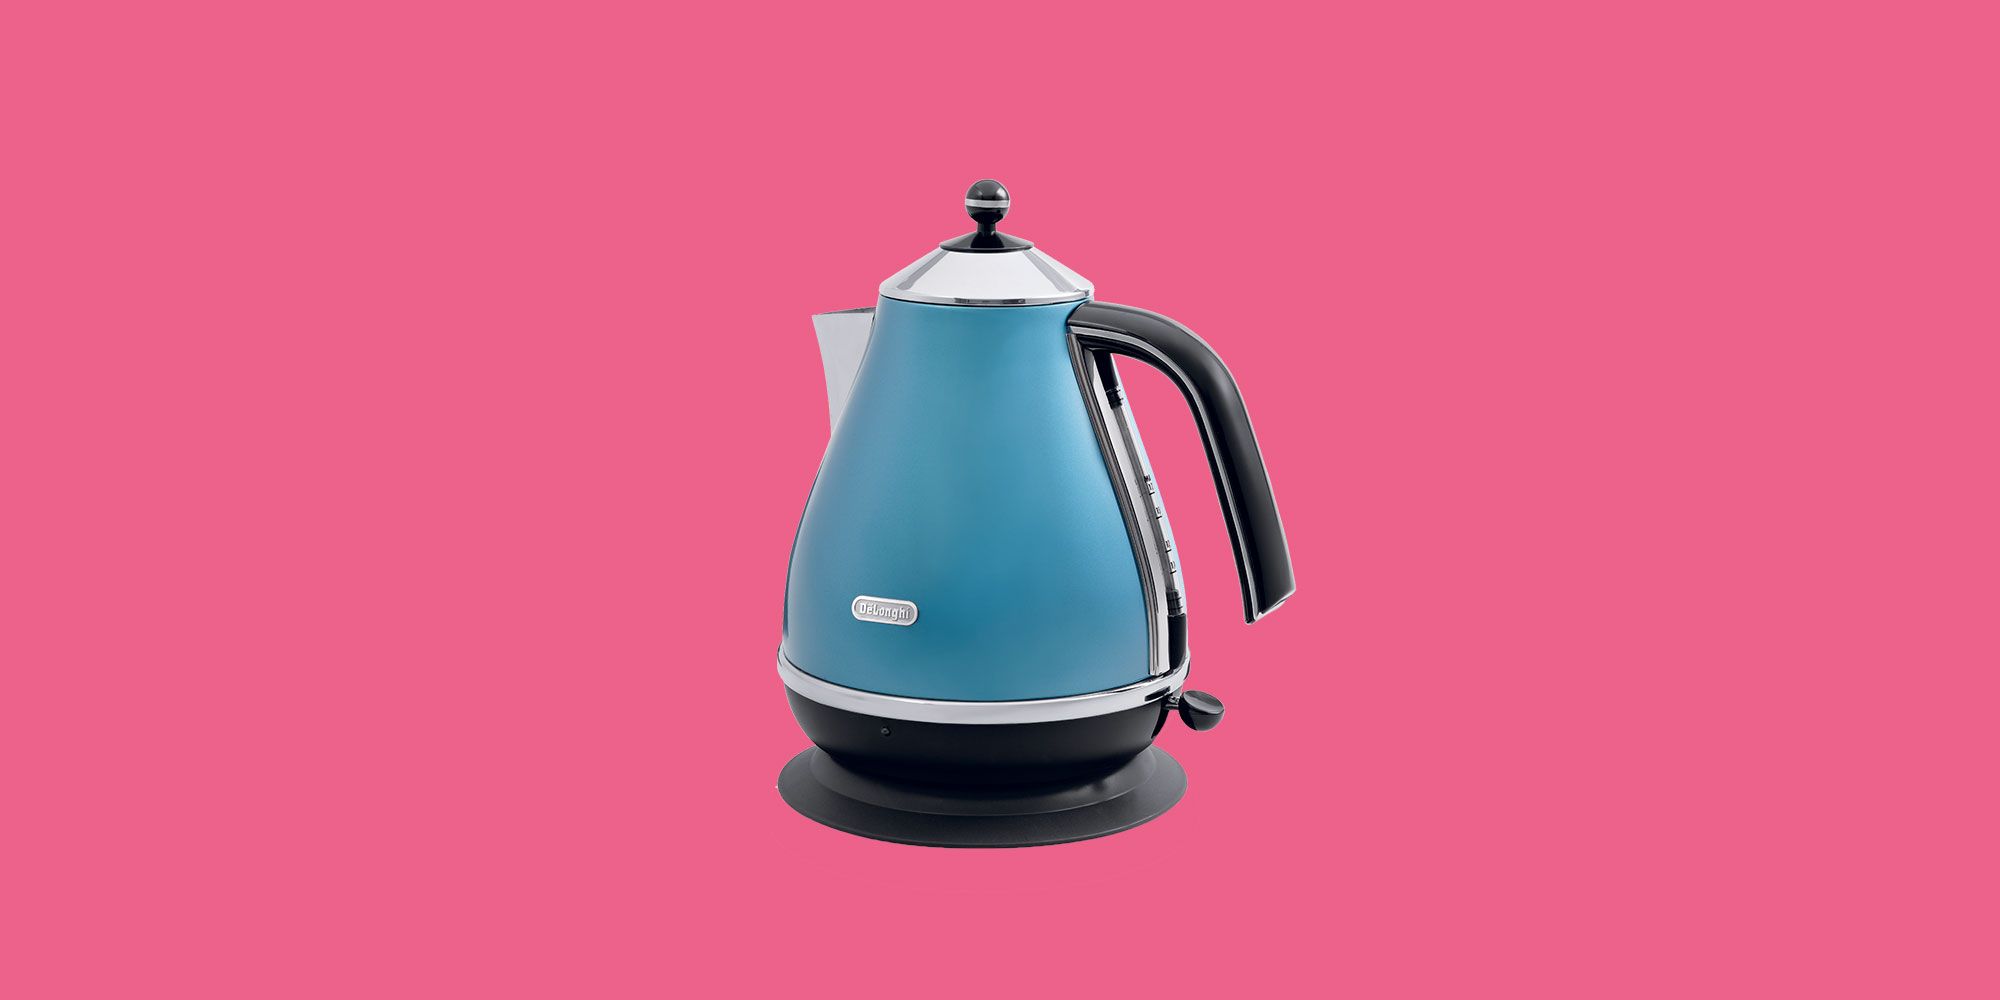 DeLonghi Electric Kettle Price in India - Buy DeLonghi Electric